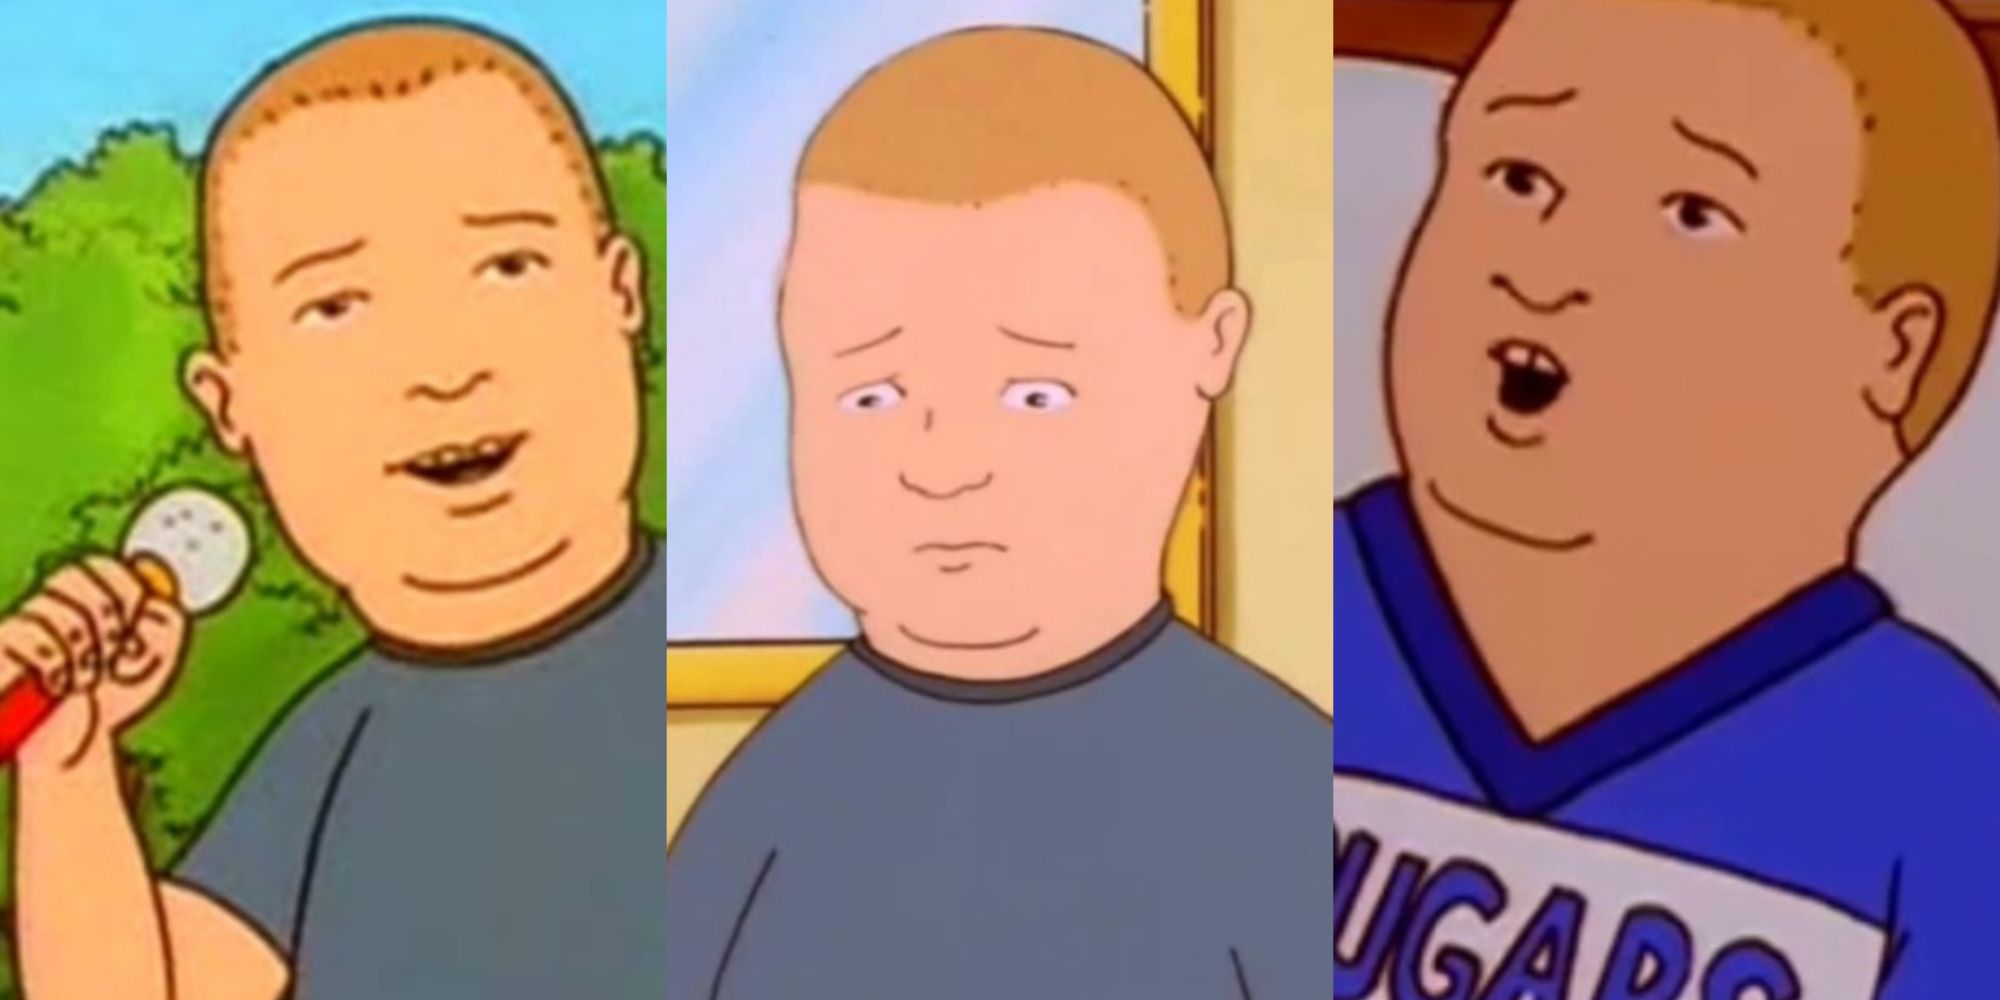 Split image of Bobby Hill from King of the Hill